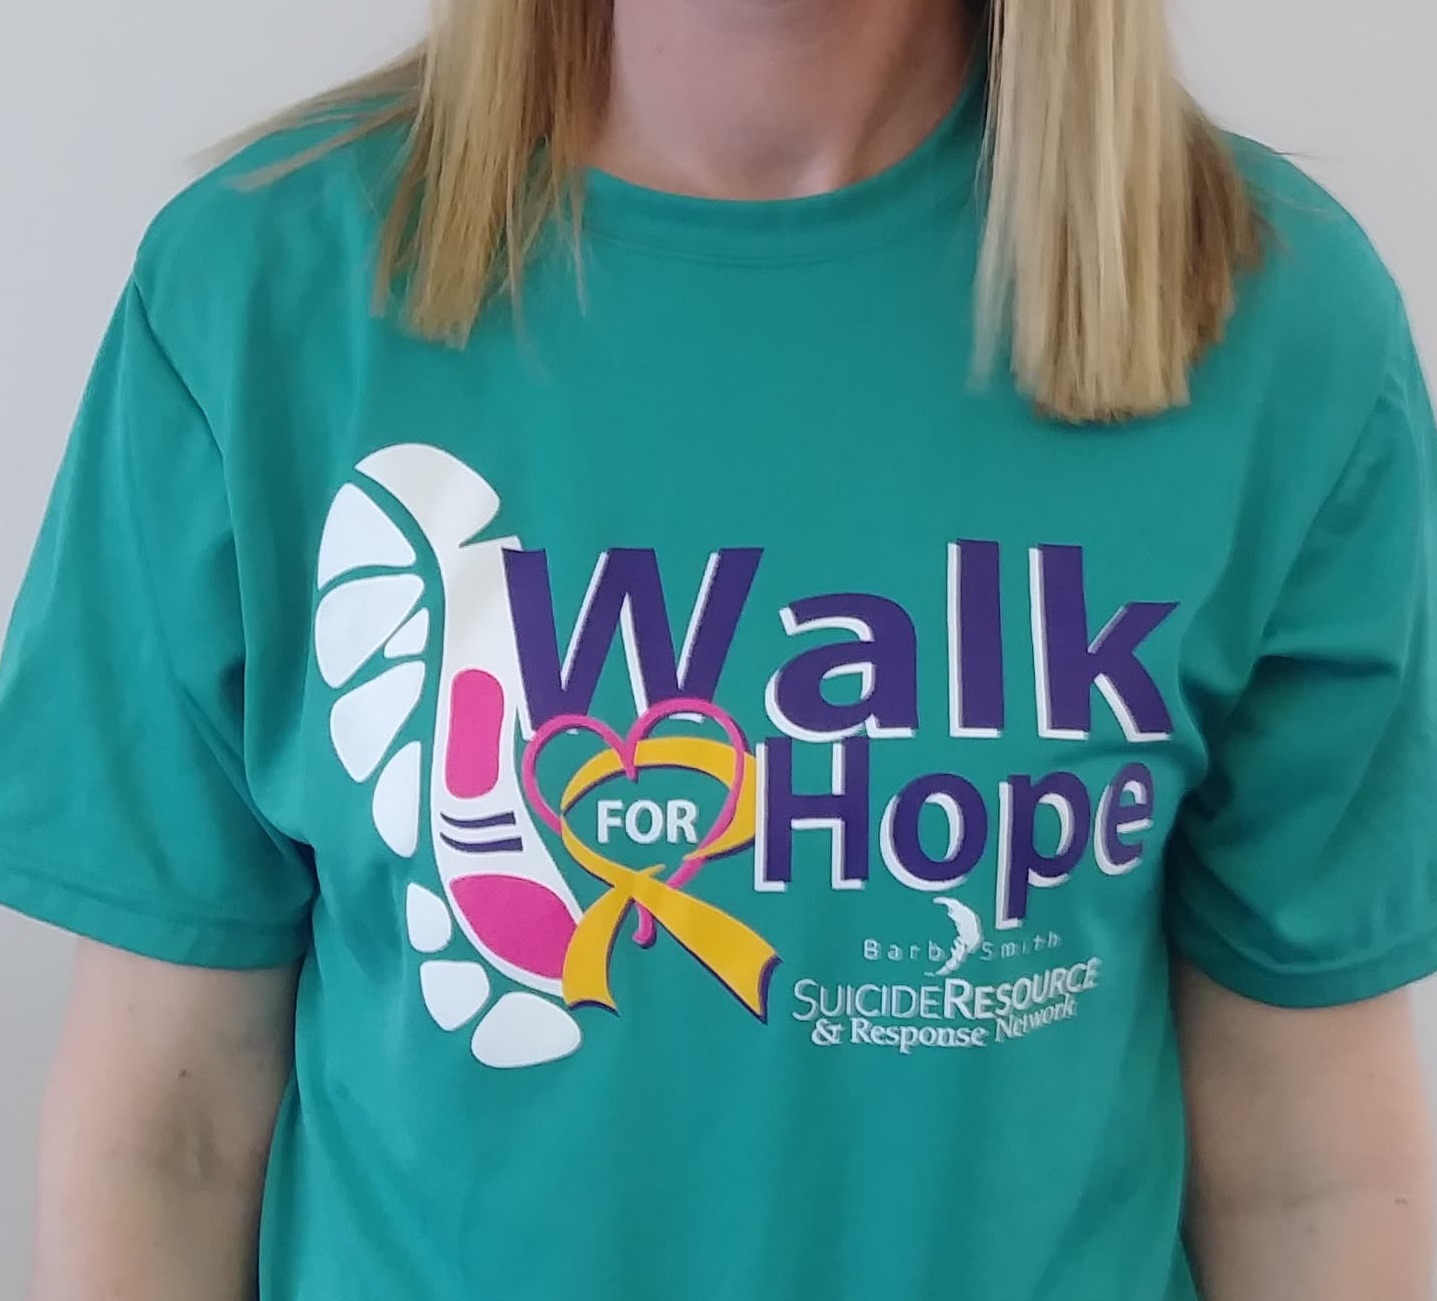 Walk for Hope TShirts Campaign